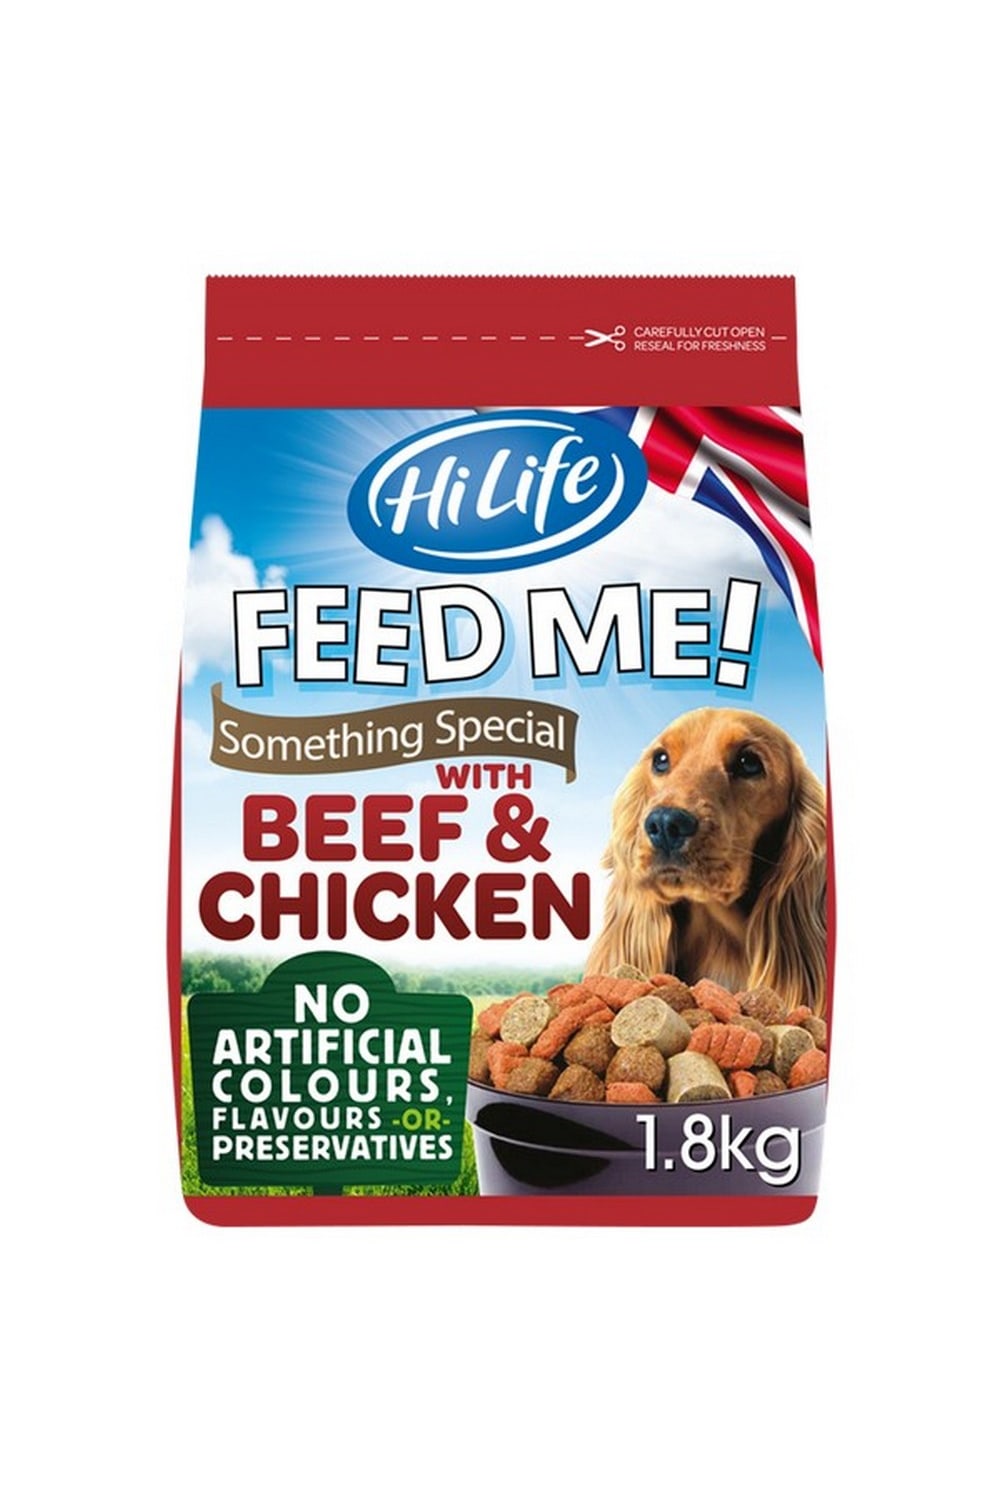 HiLife Feed Me Something Special Beef & Chicken Dog Food (May Vary) (3.9lbs)